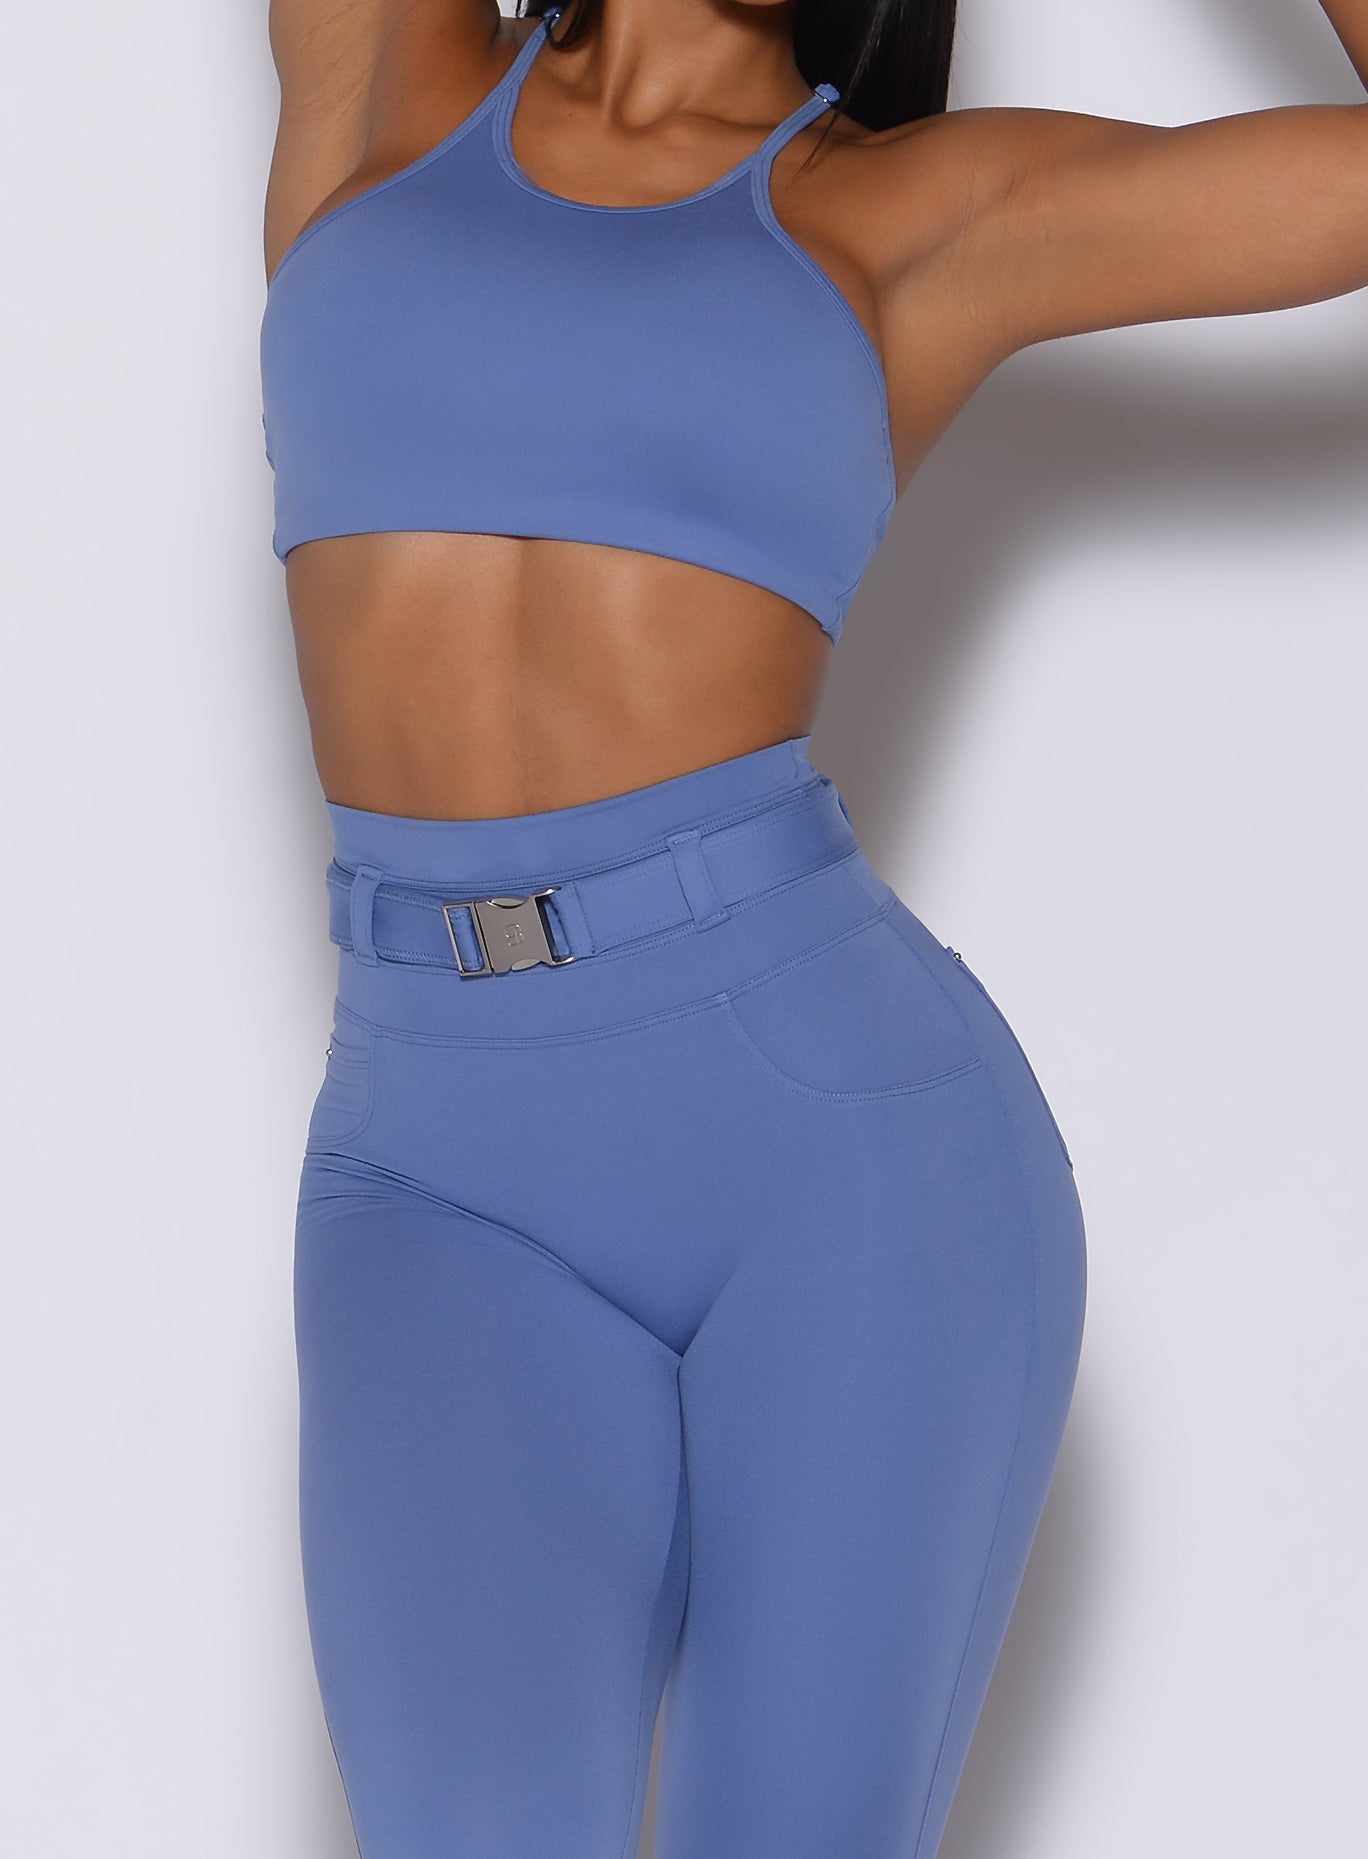 front profile view of a model with her hands over her head wearing our high neck crop bra in denim blue color along with the matching leggings